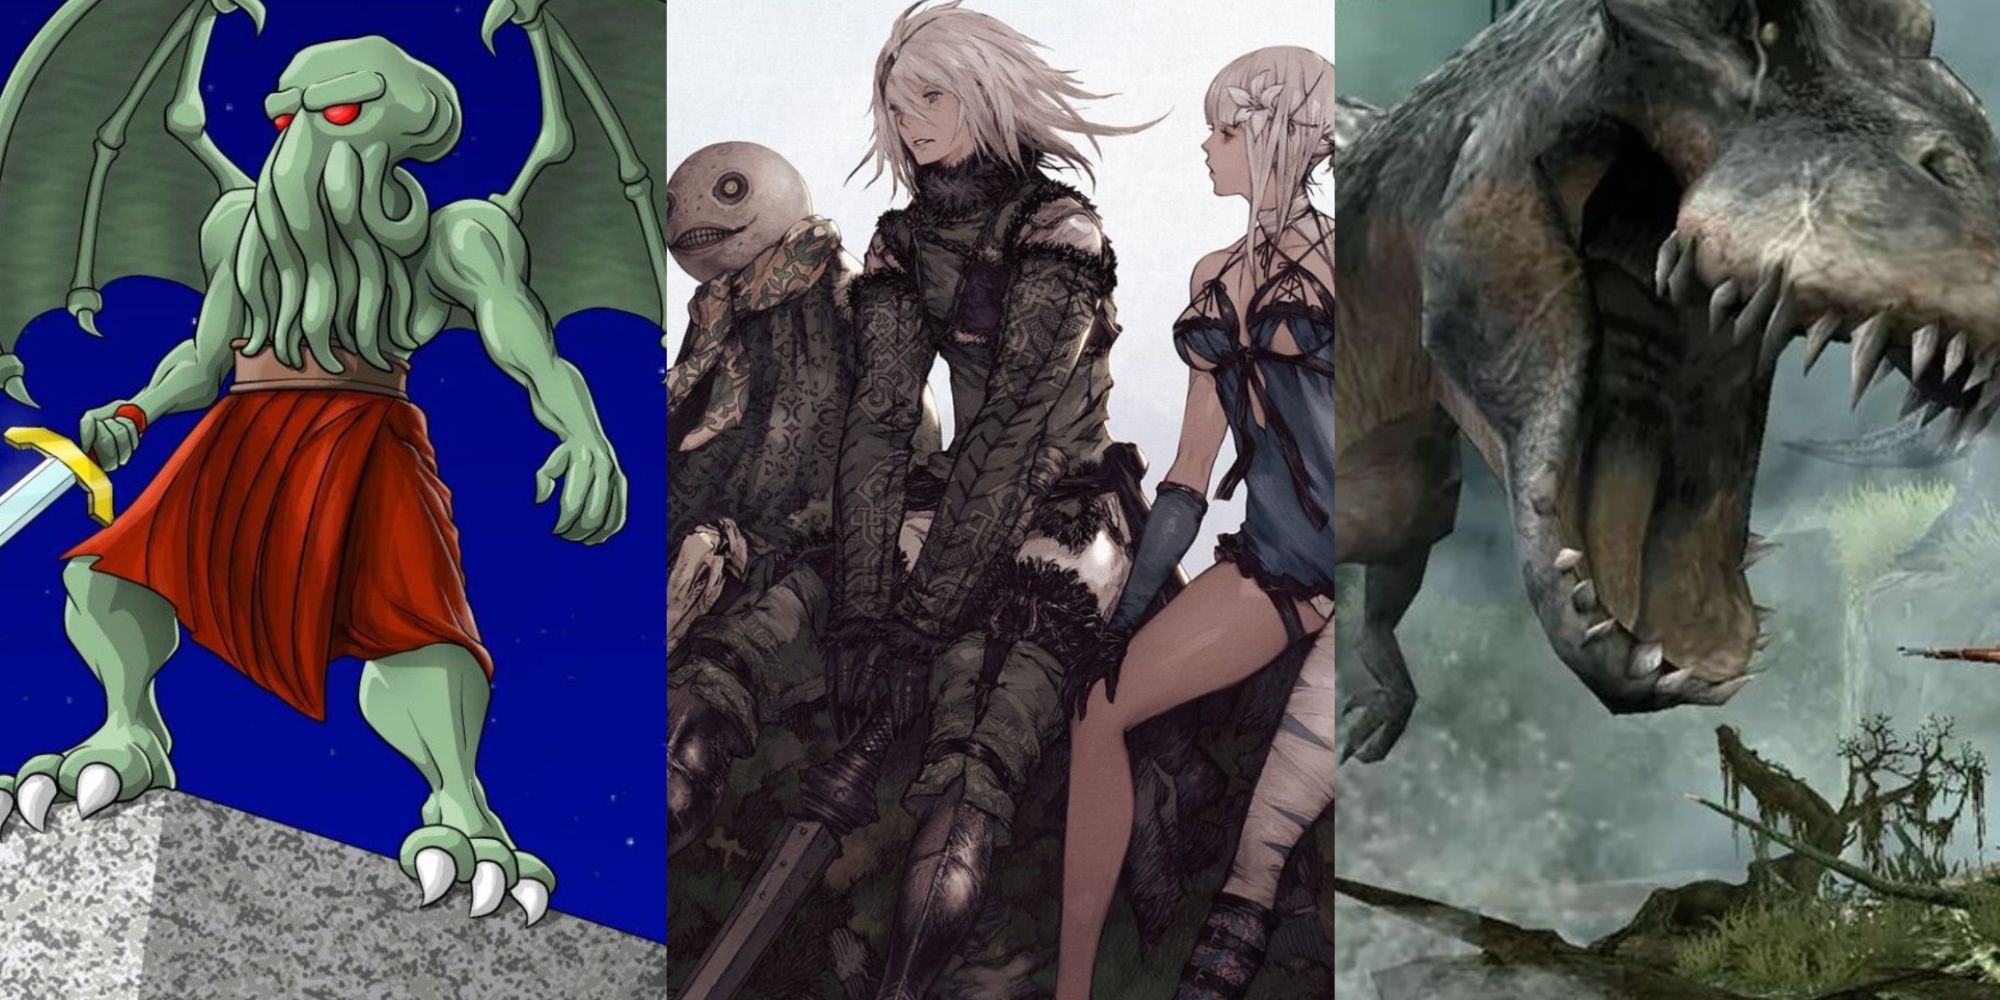 A collage with Cthulhu Saves the World, Nier Replicant, and King Kong.